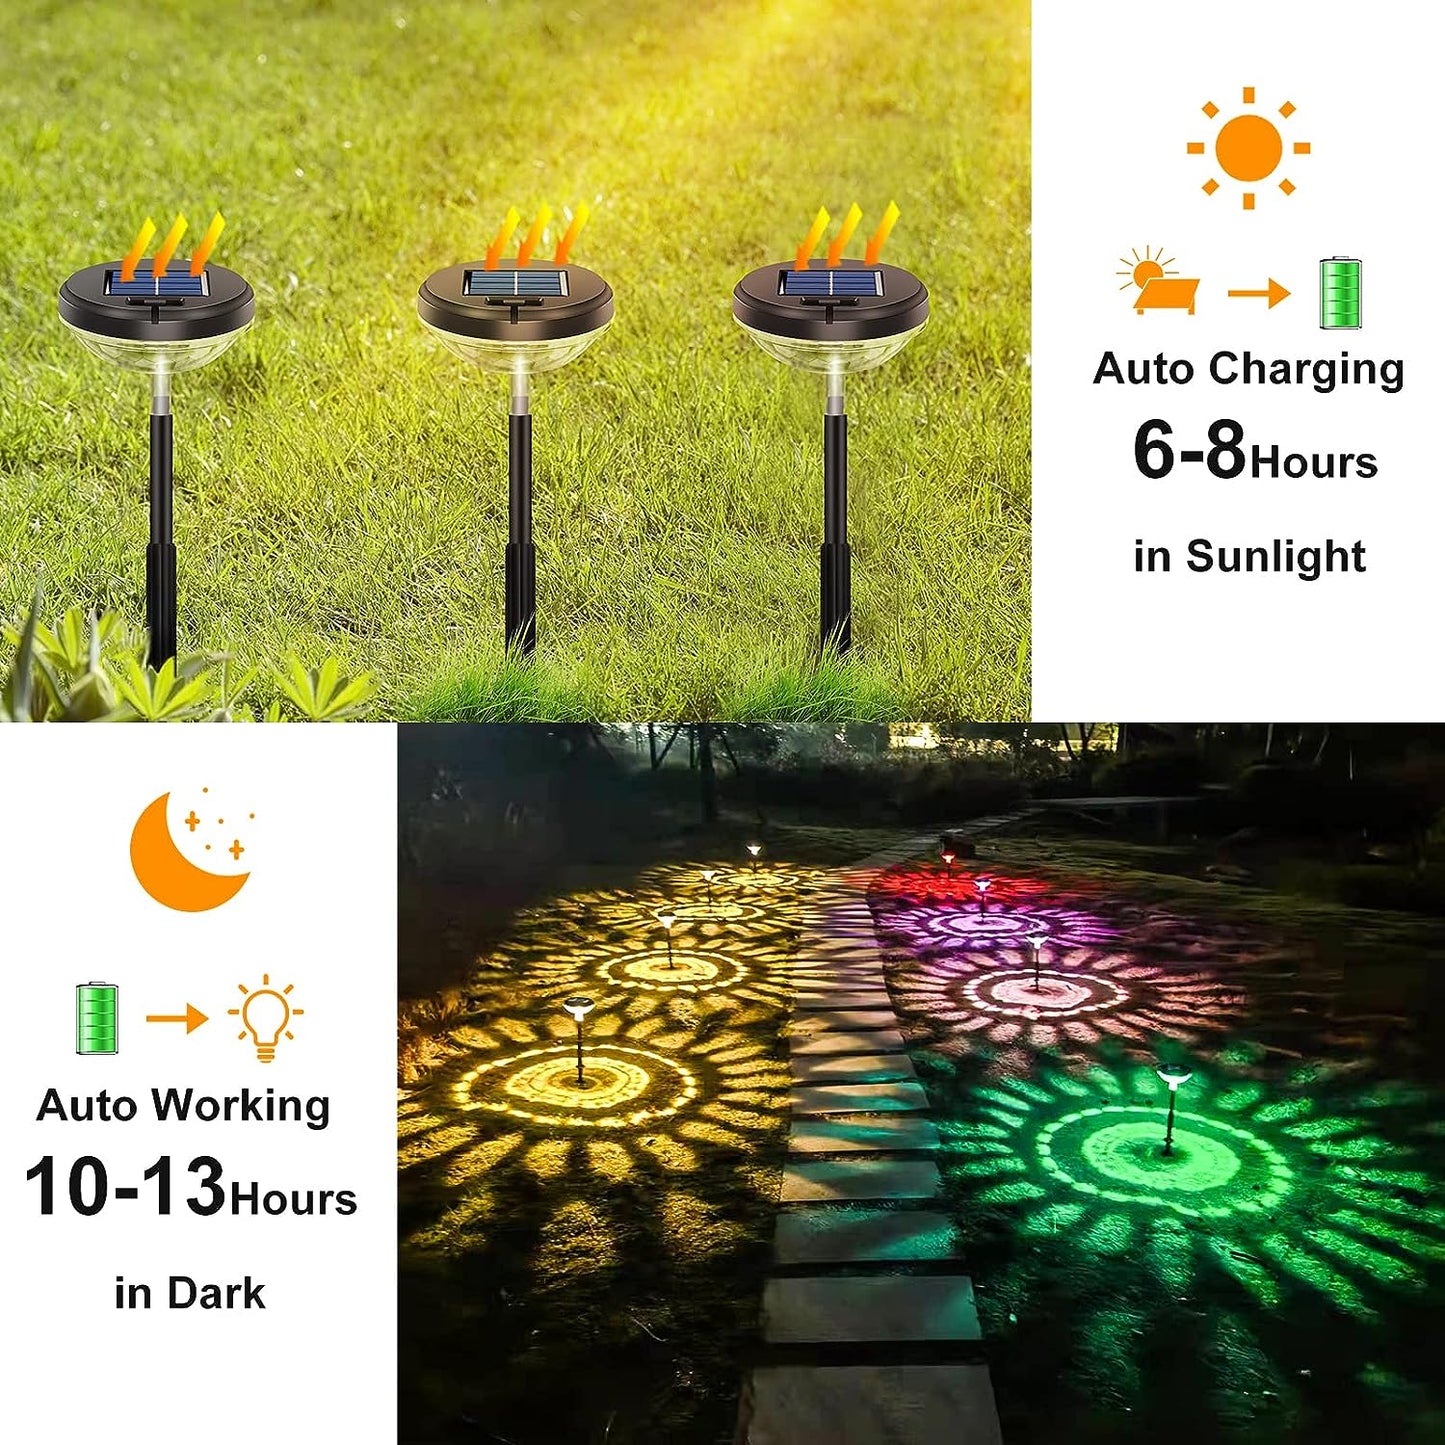 COOLBABY WQSJ010 Solar Pathway Lights 2 Pack,Solar Ground Lamp Outdoor Garden Landscape Lamp,Color Changing+Warm White LED Solar Lights,Projection Lawn Lamp Waterproof Decorative Lamp - COOL BABY